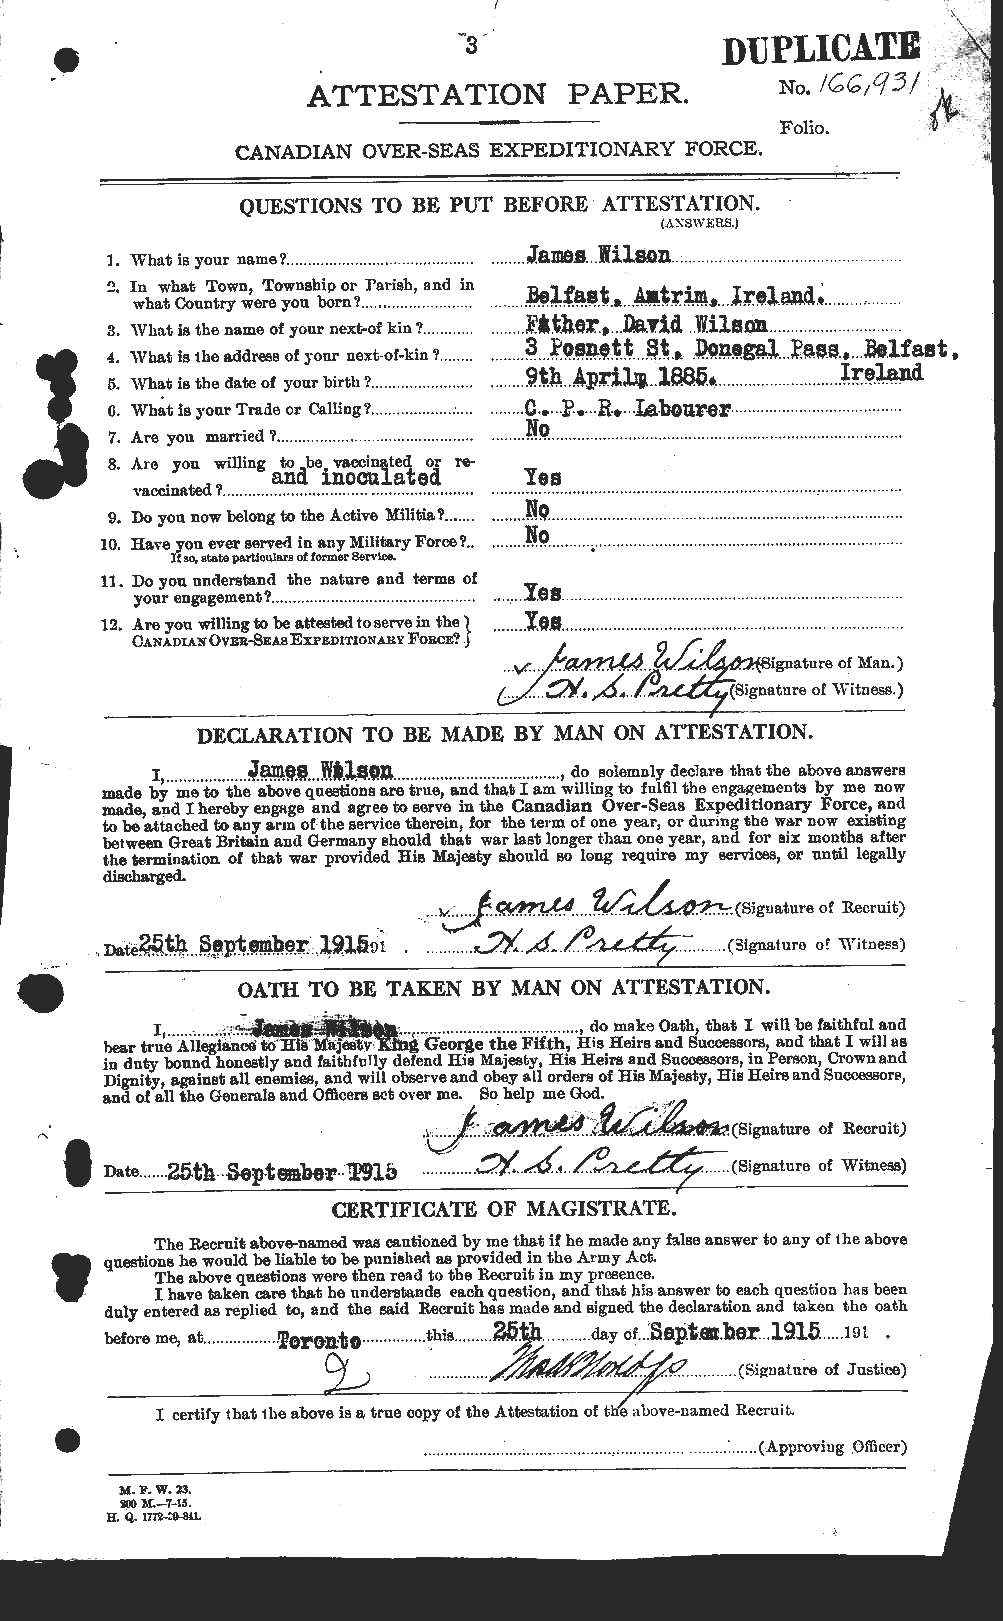 Personnel Records of the First World War - CEF 681304a